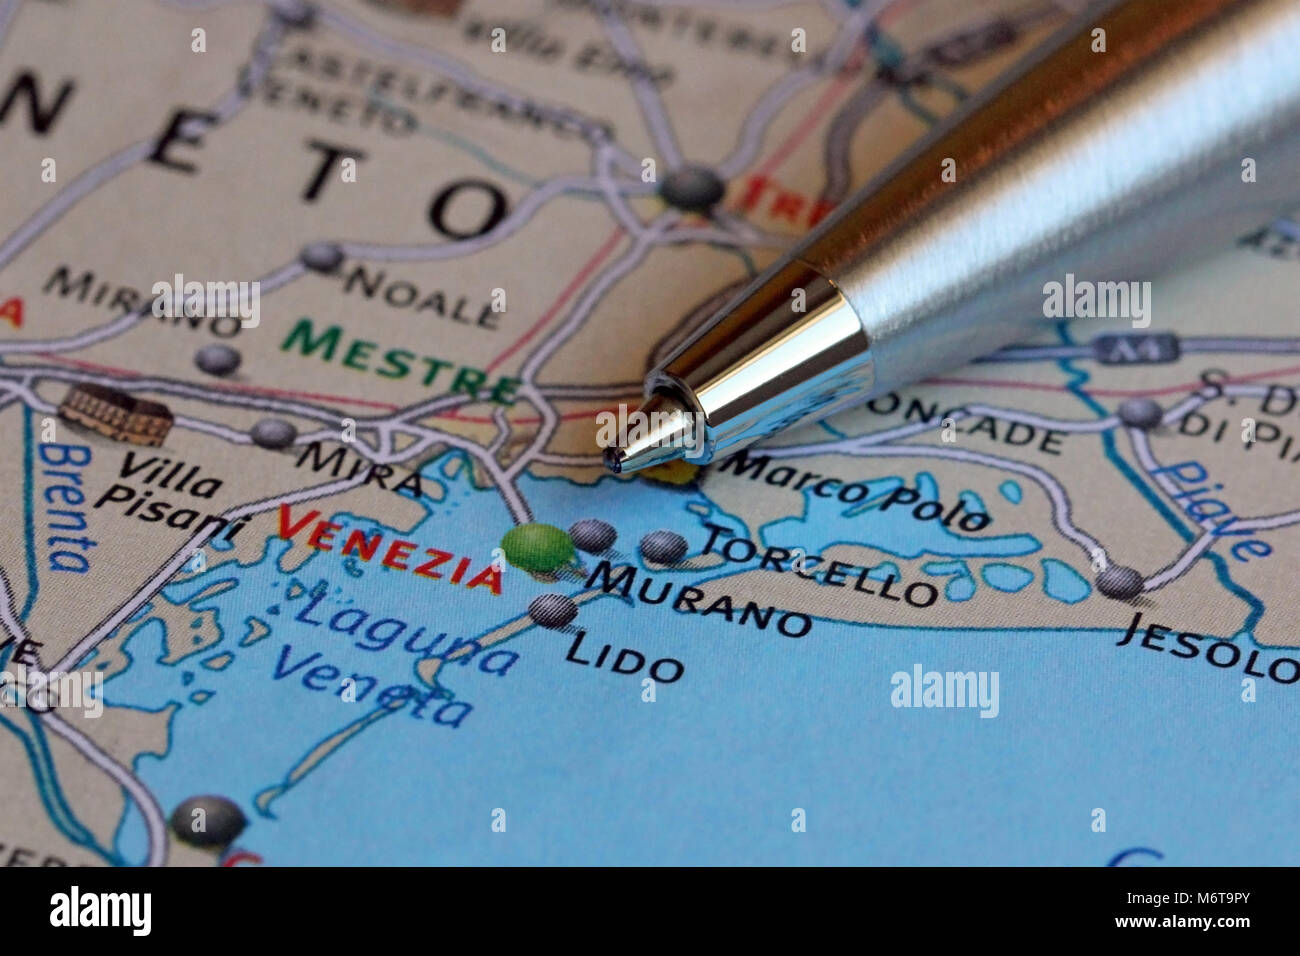 Macro image of a ballpoint pen pointing at Venice on the map of Italy. Shallow depth of field. Stock Photo